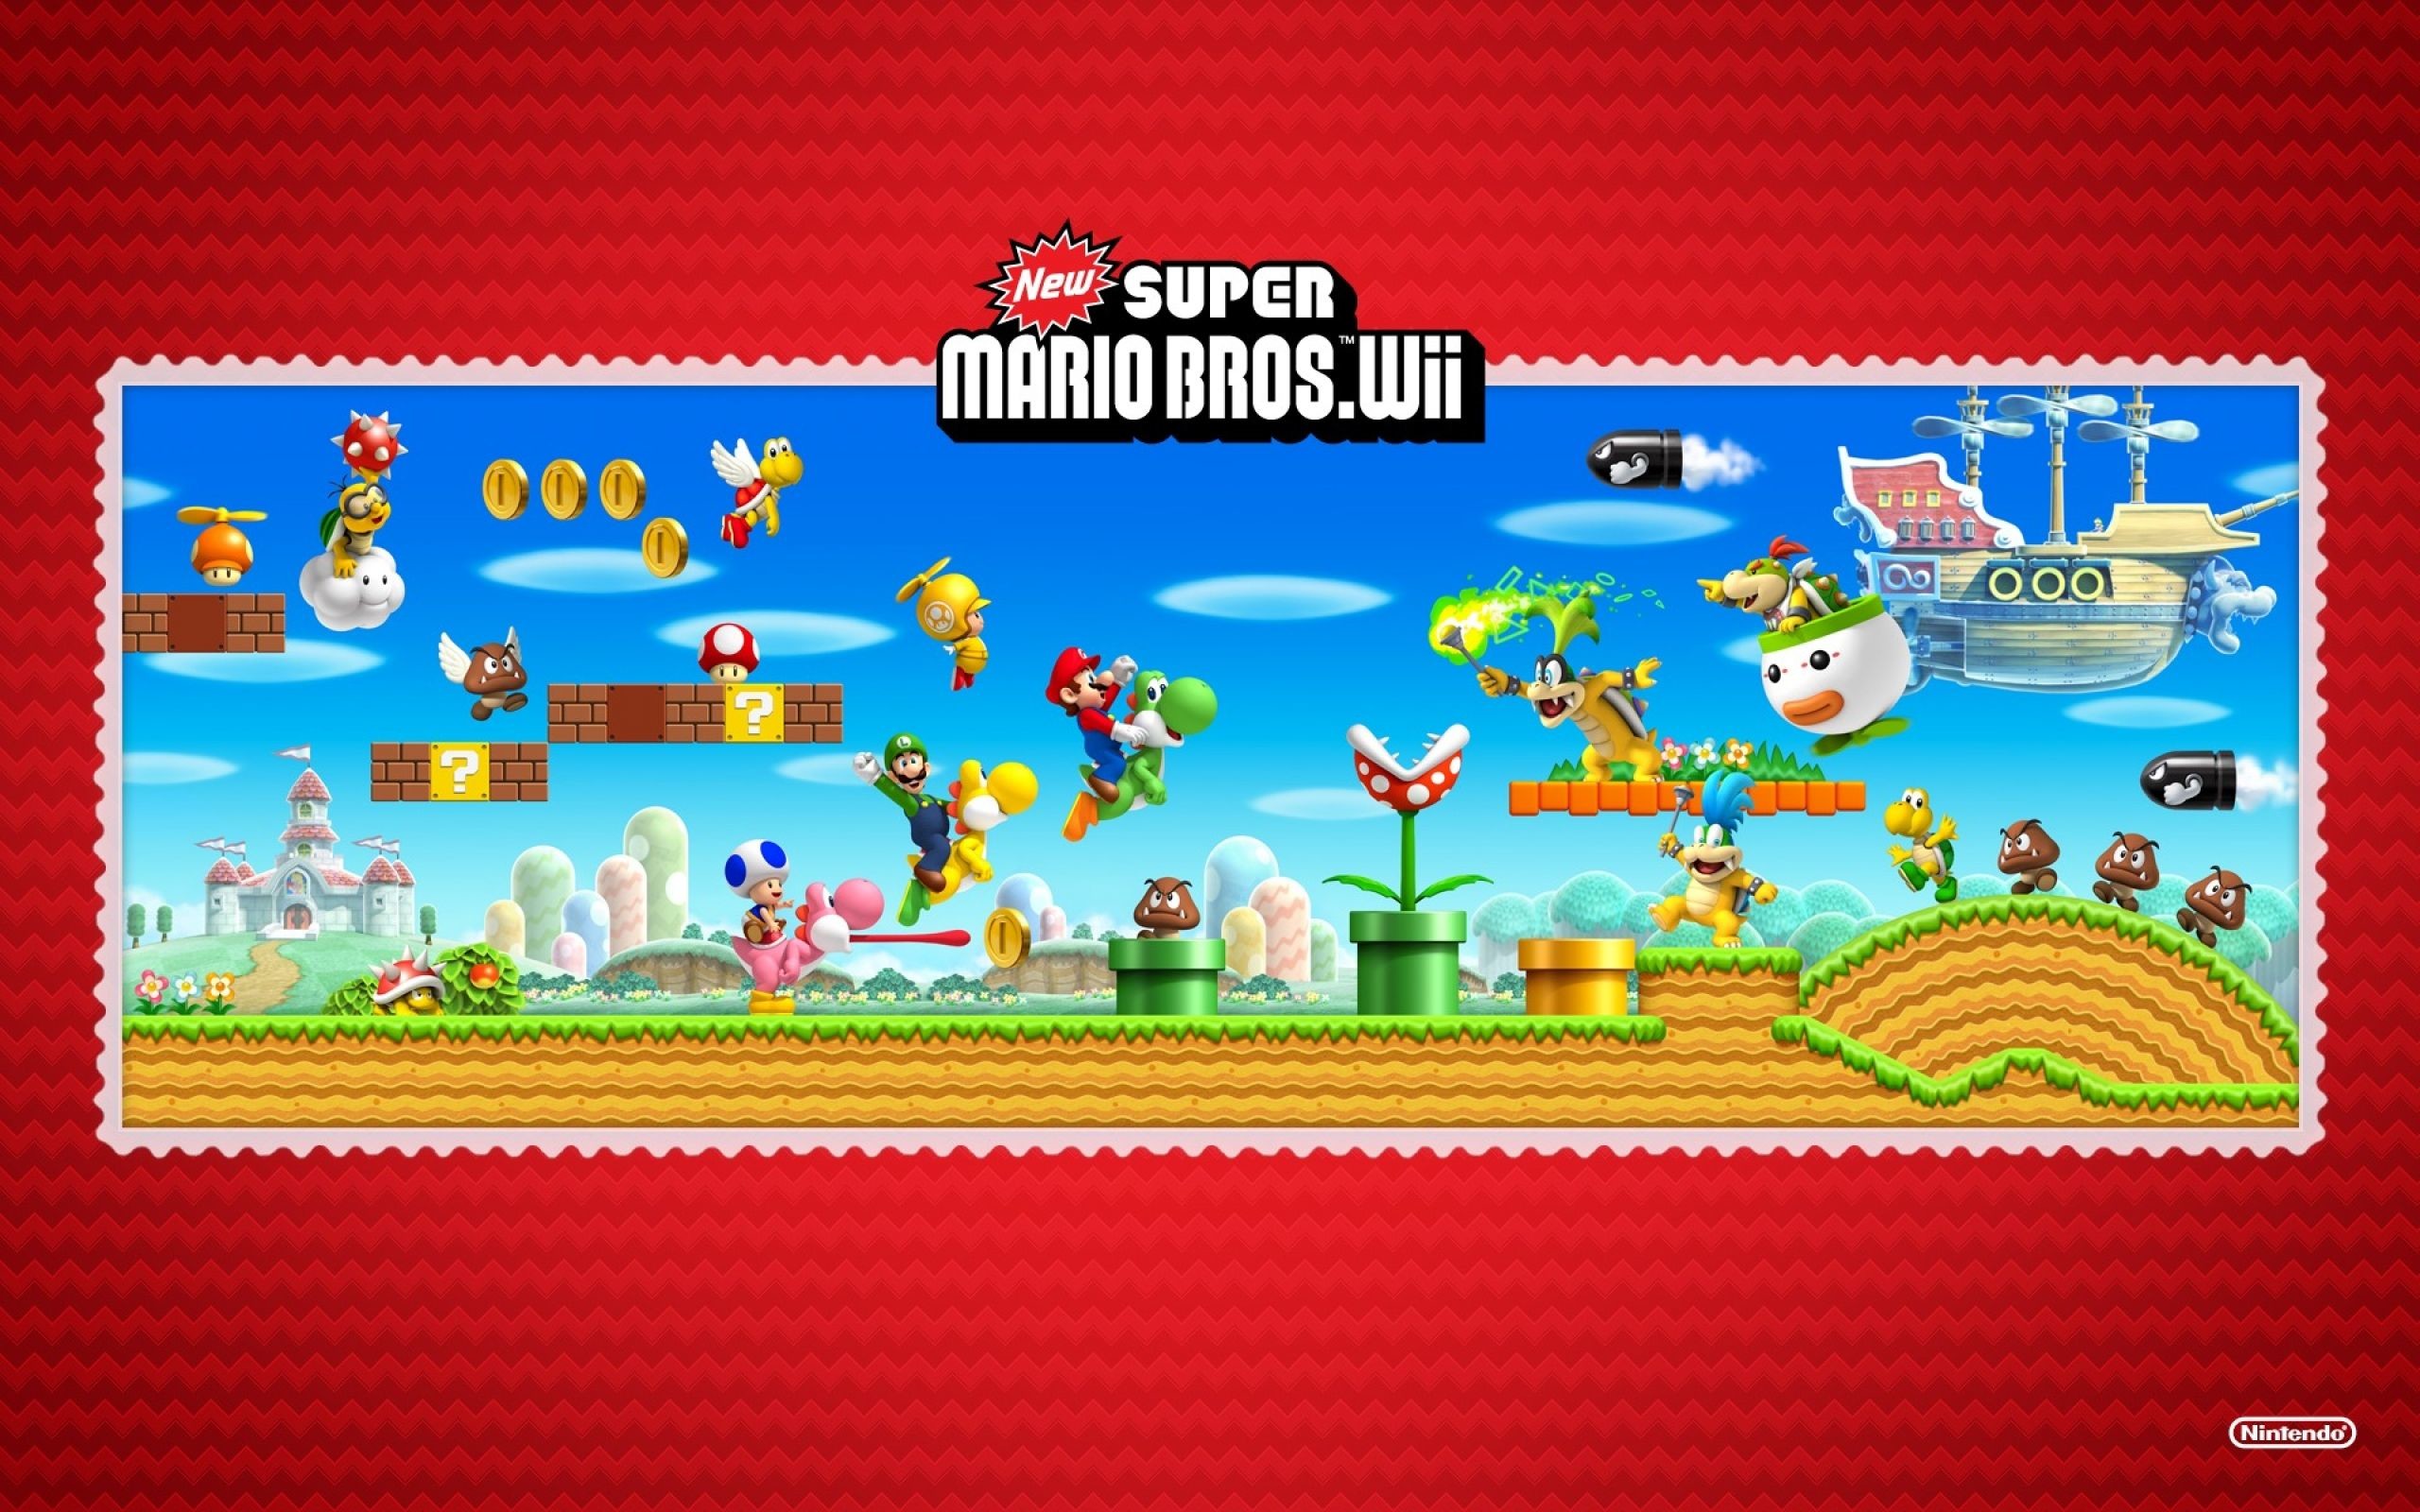 2560x1600 New Super Mario Bros. WII wallpapers